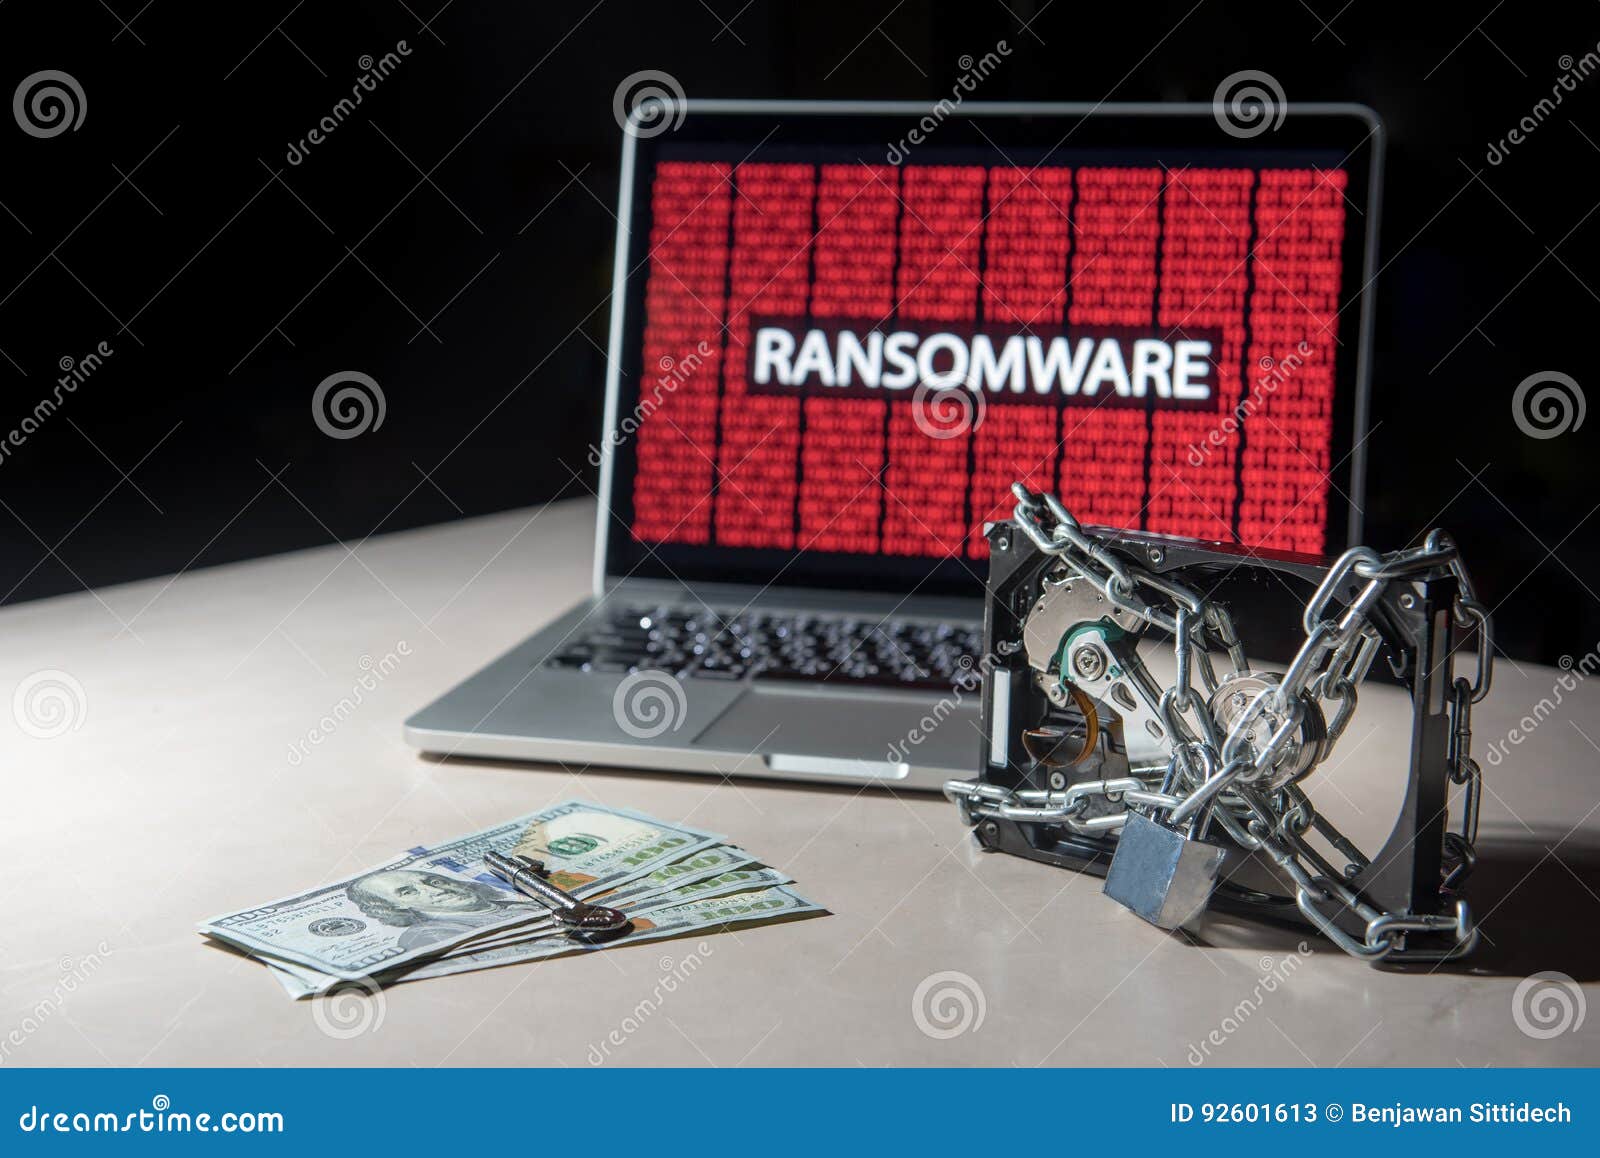 hard disk locked with monitor show ransomware cyber attack